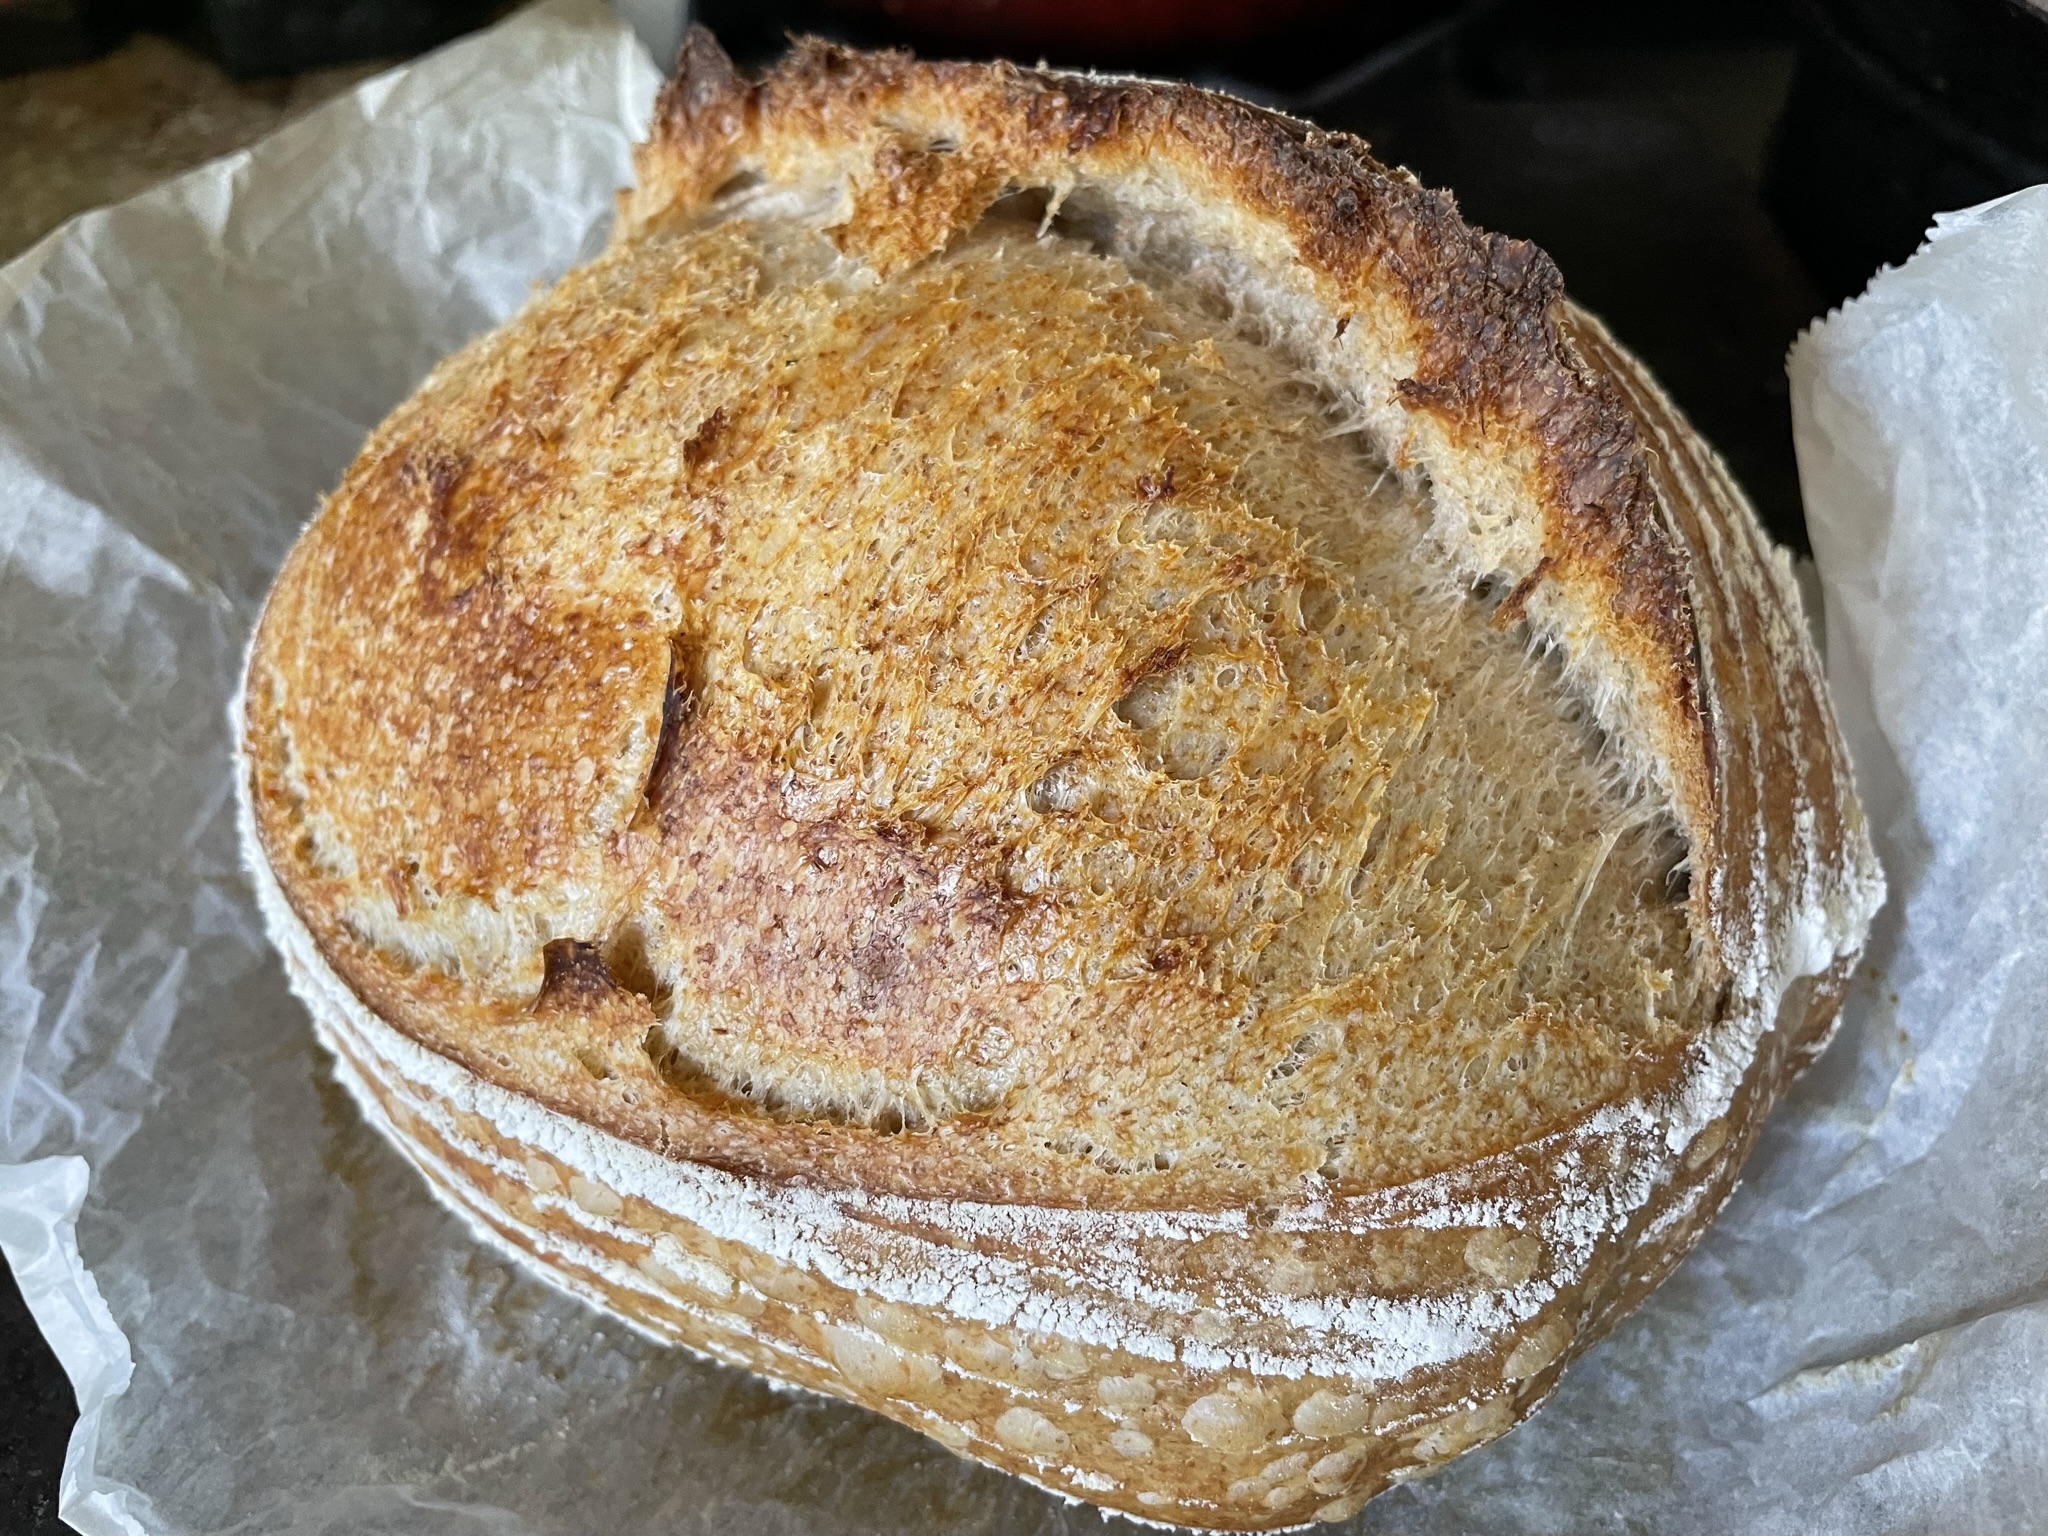 I Decided to Bake Sourdough Bread In My New/Old 2 Qt. Lodge Dutch Oven 